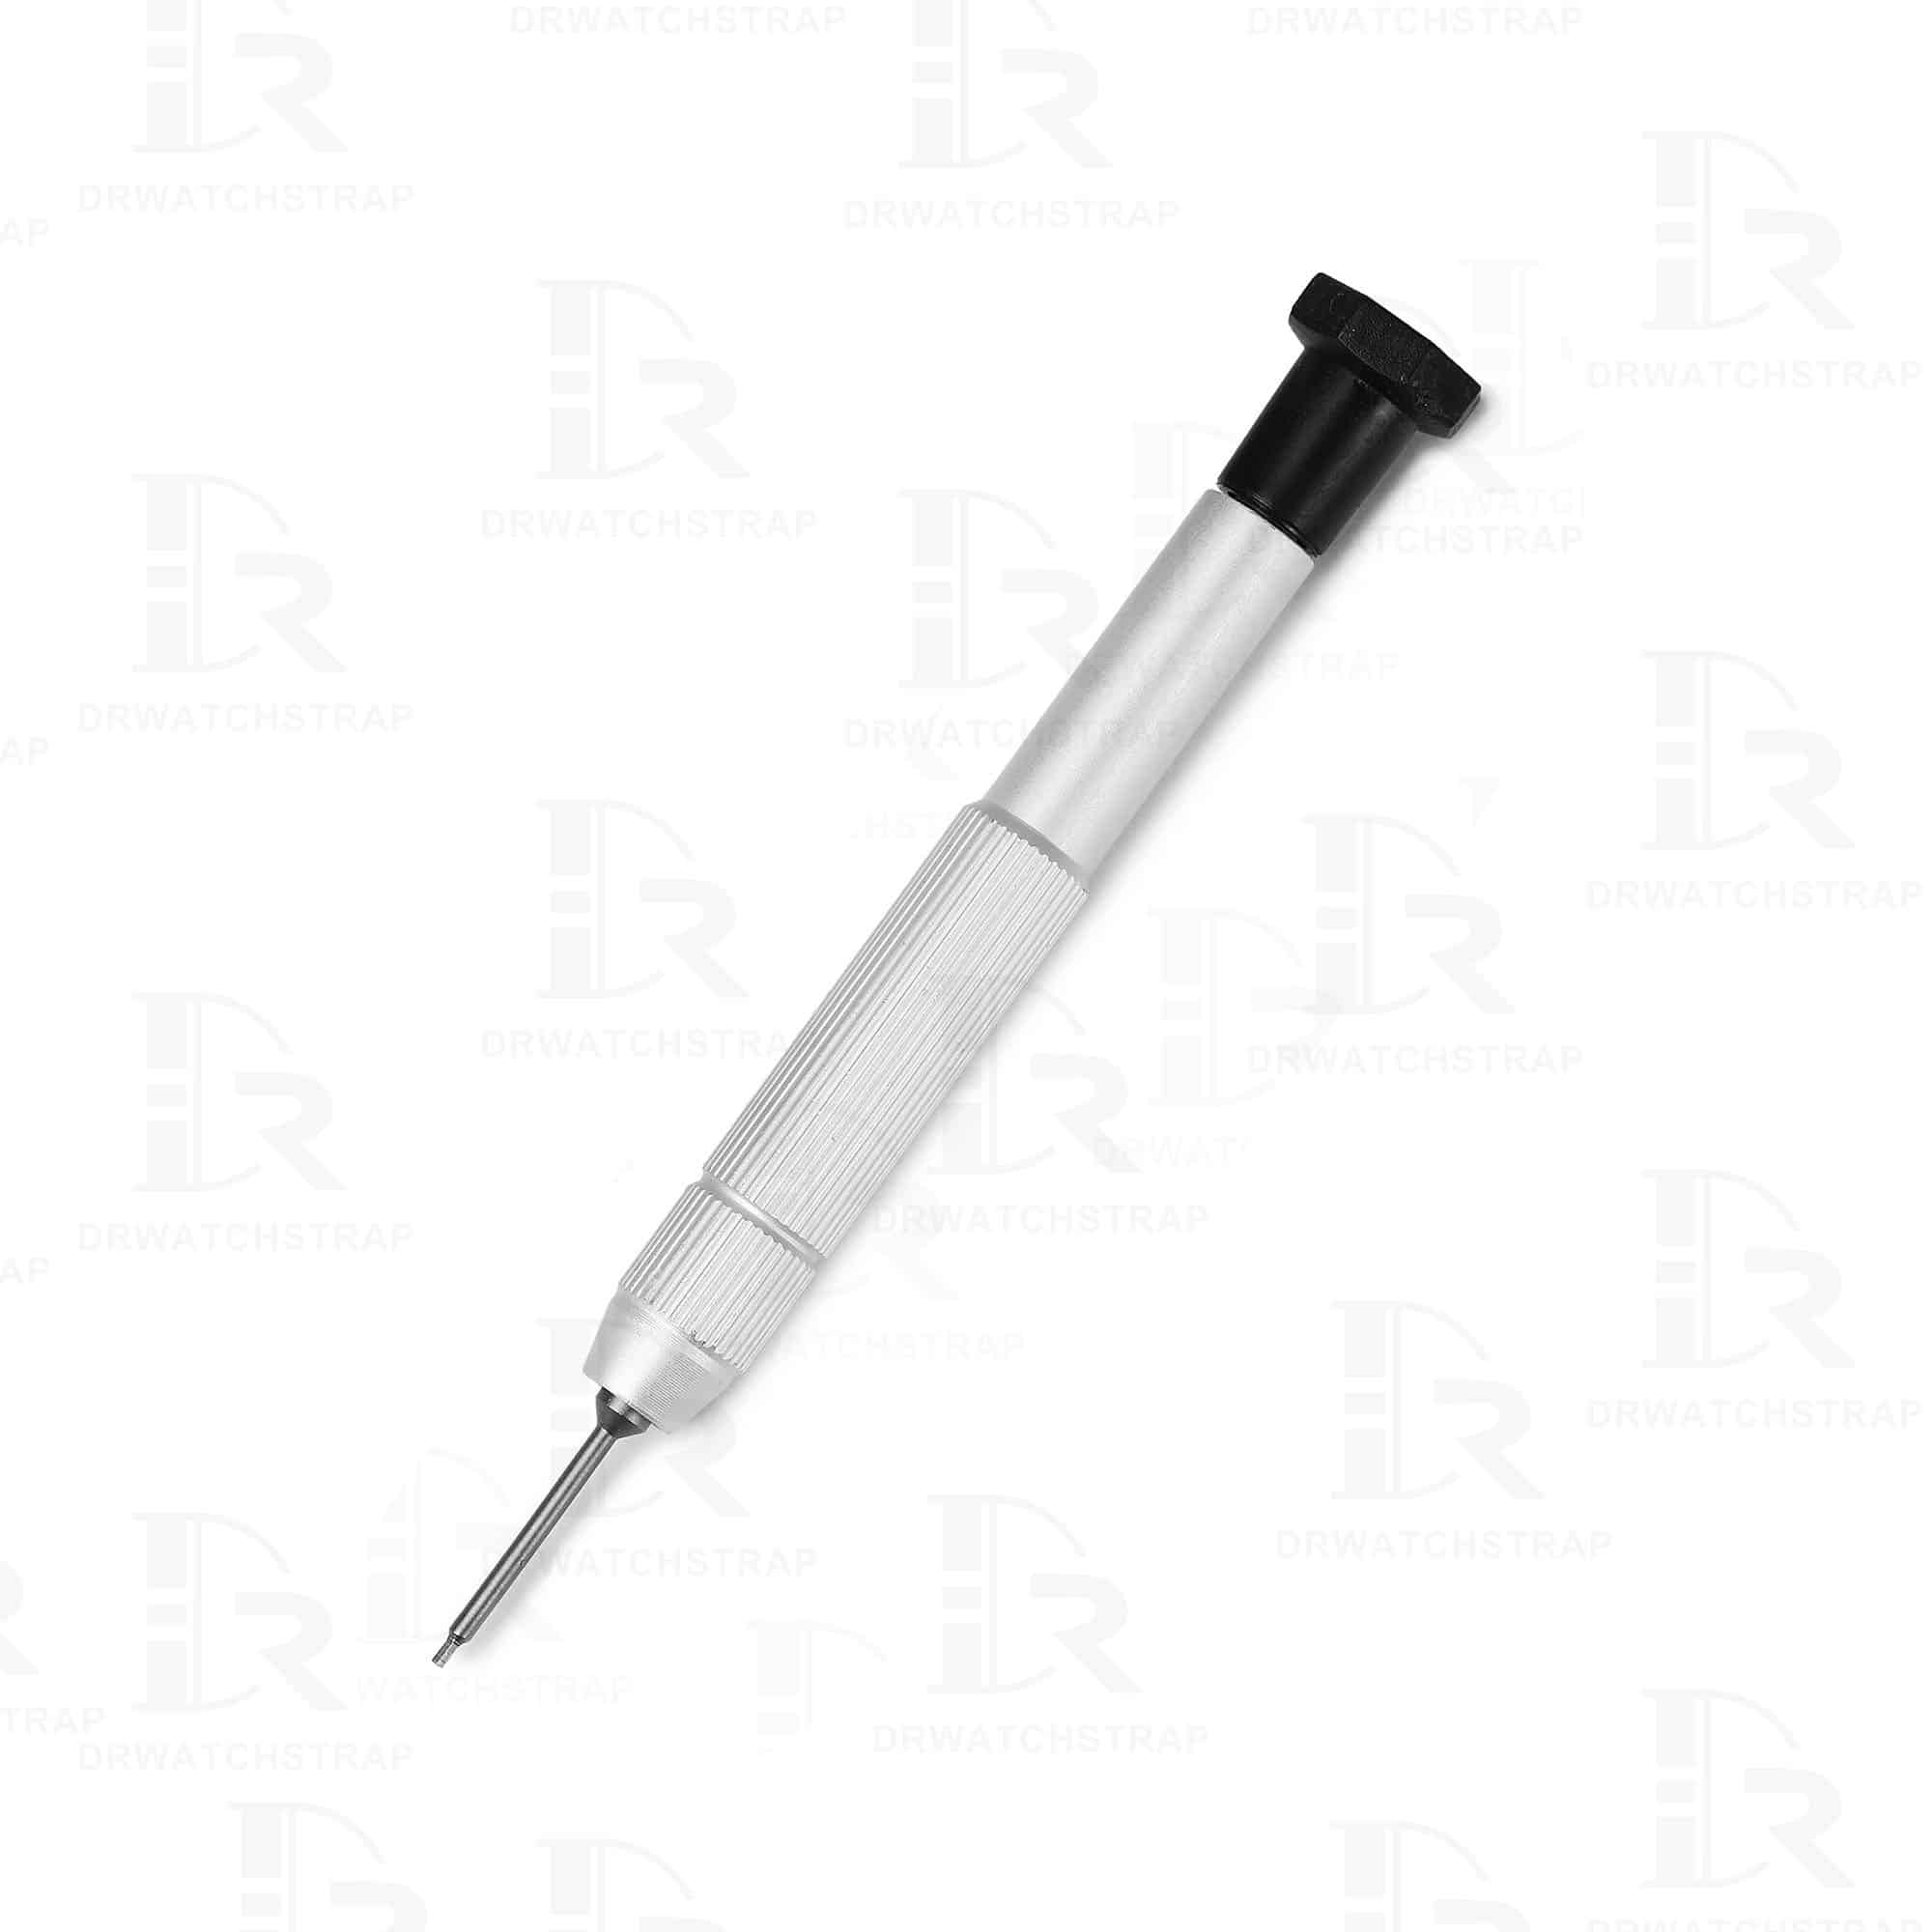 Blancpain watch screwdriver tool for sale low price